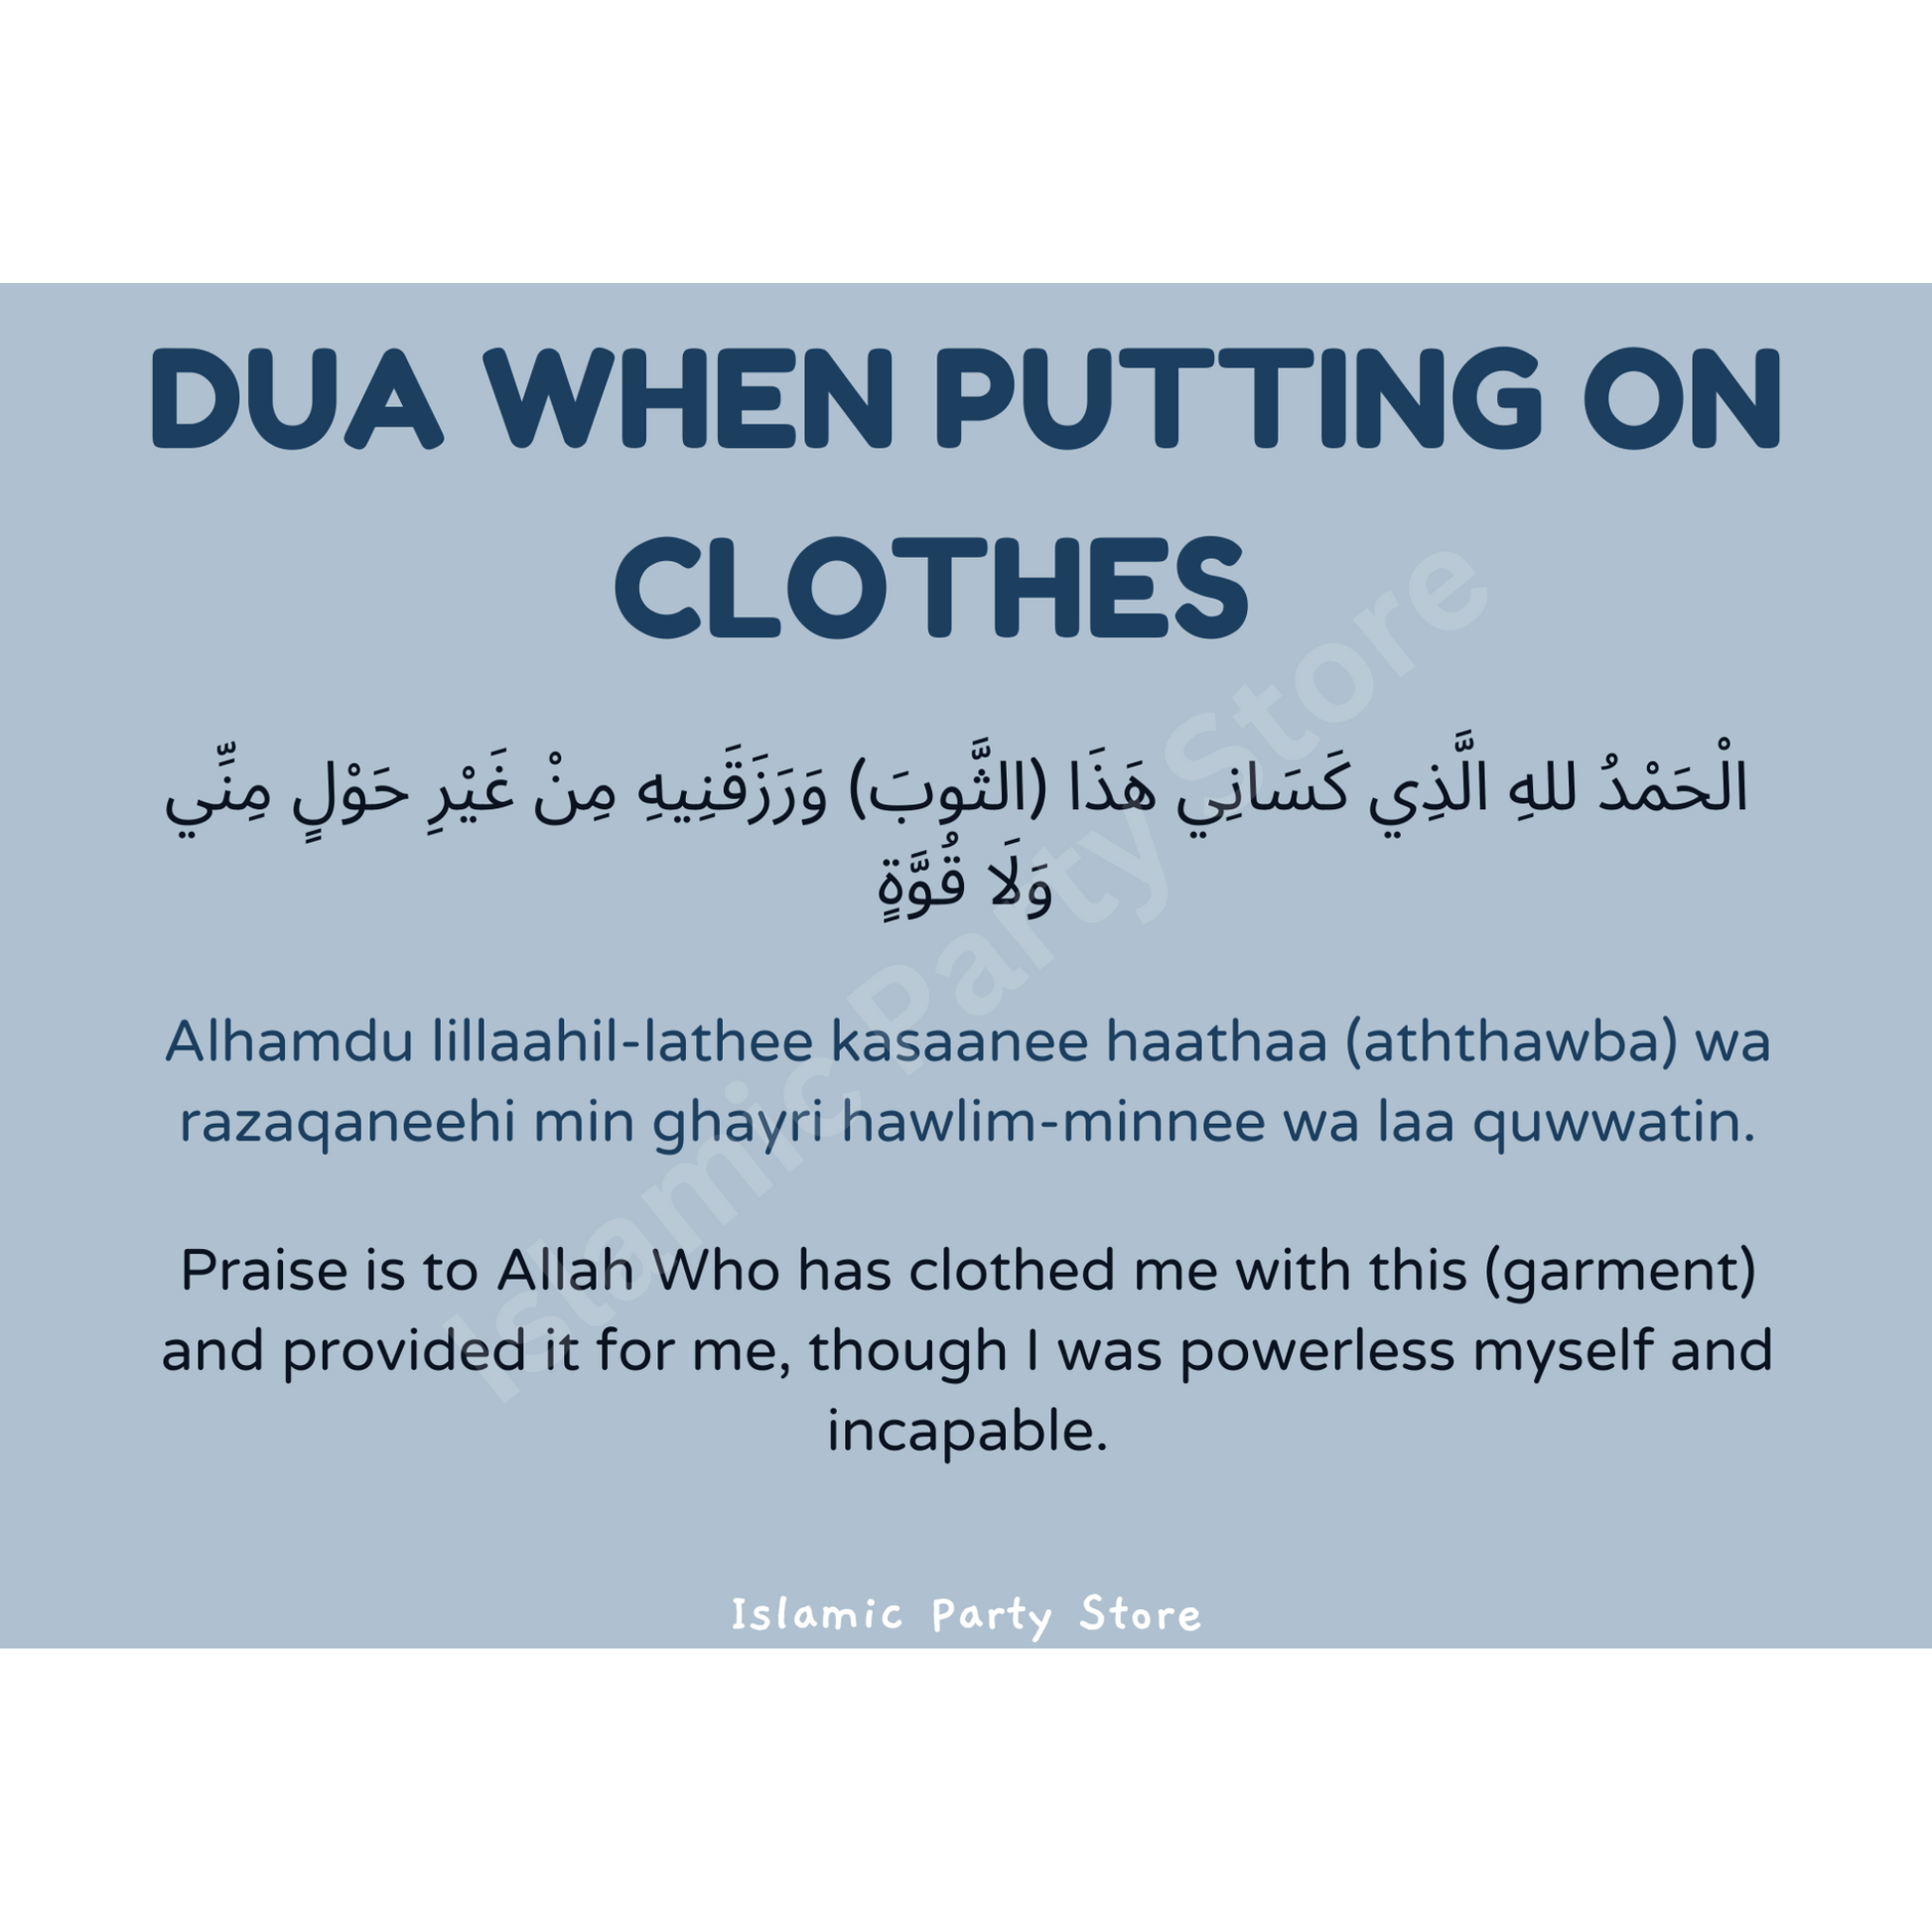 Putting on Clothes Dua